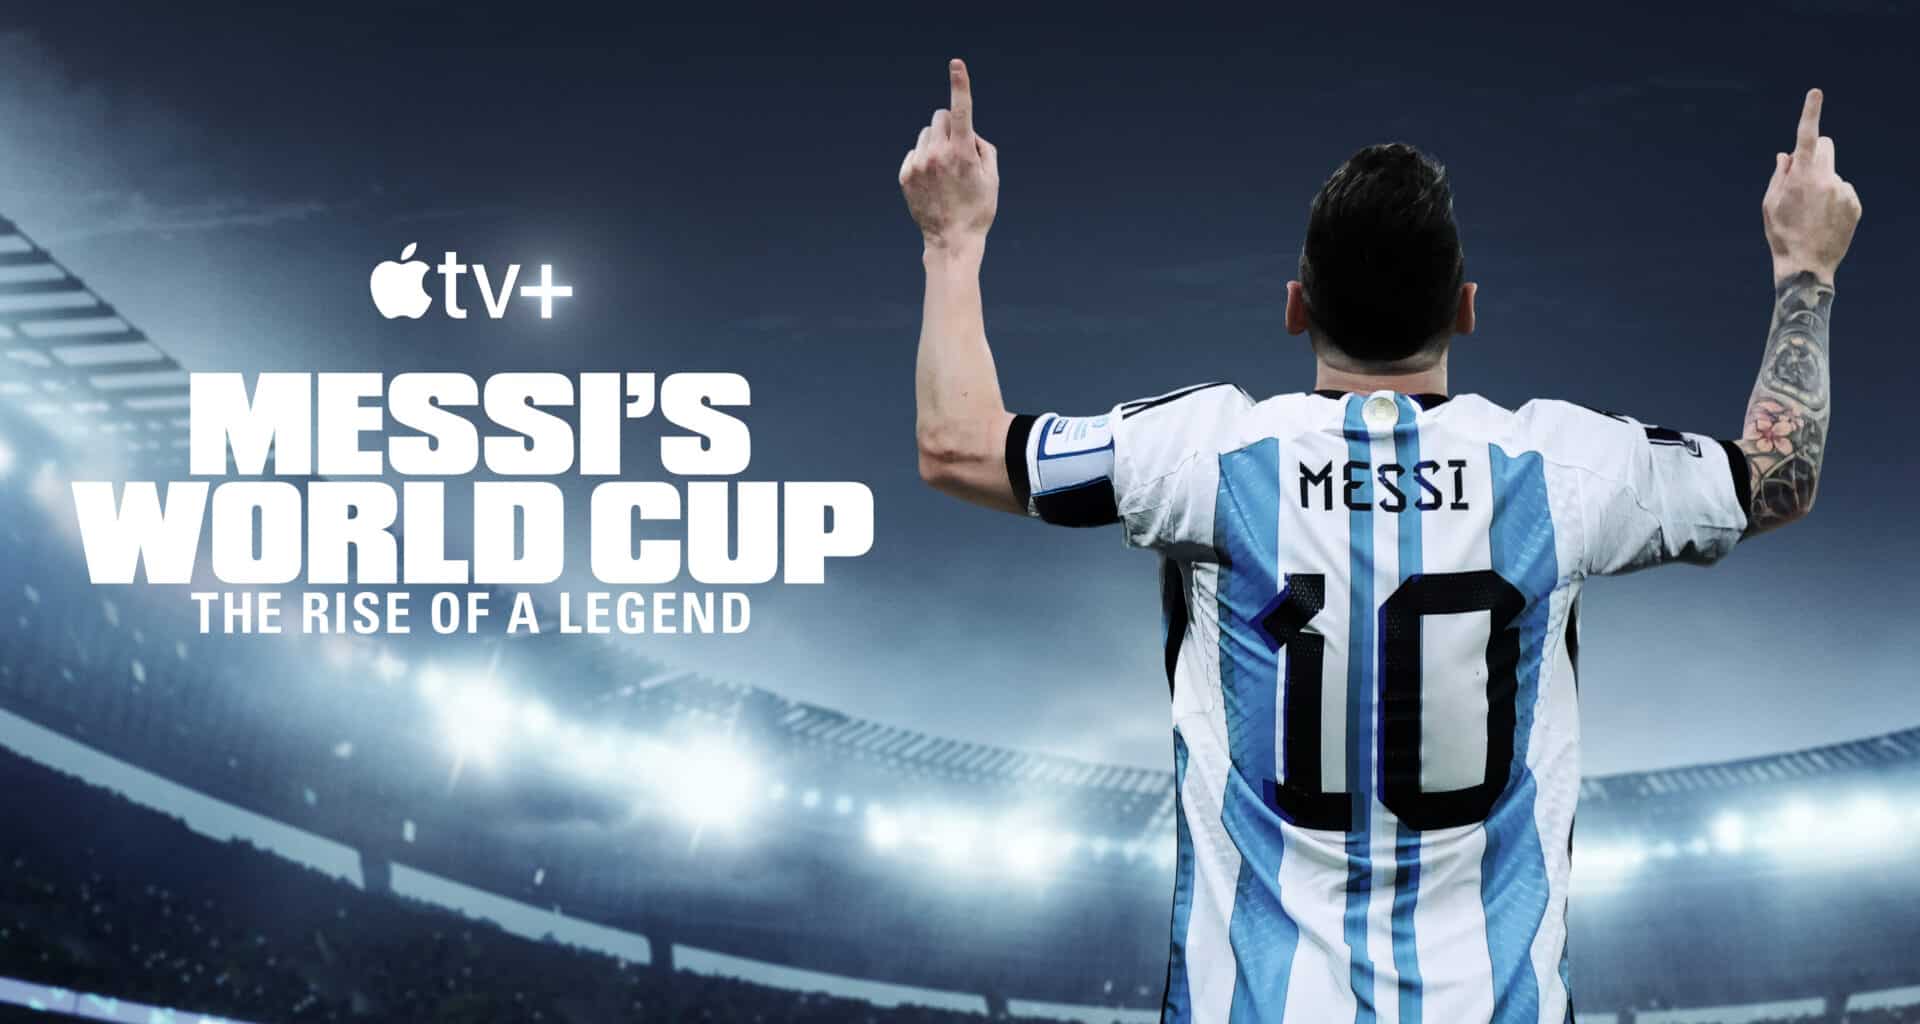 “Messi’s World Cup: The Rise of a Legend”